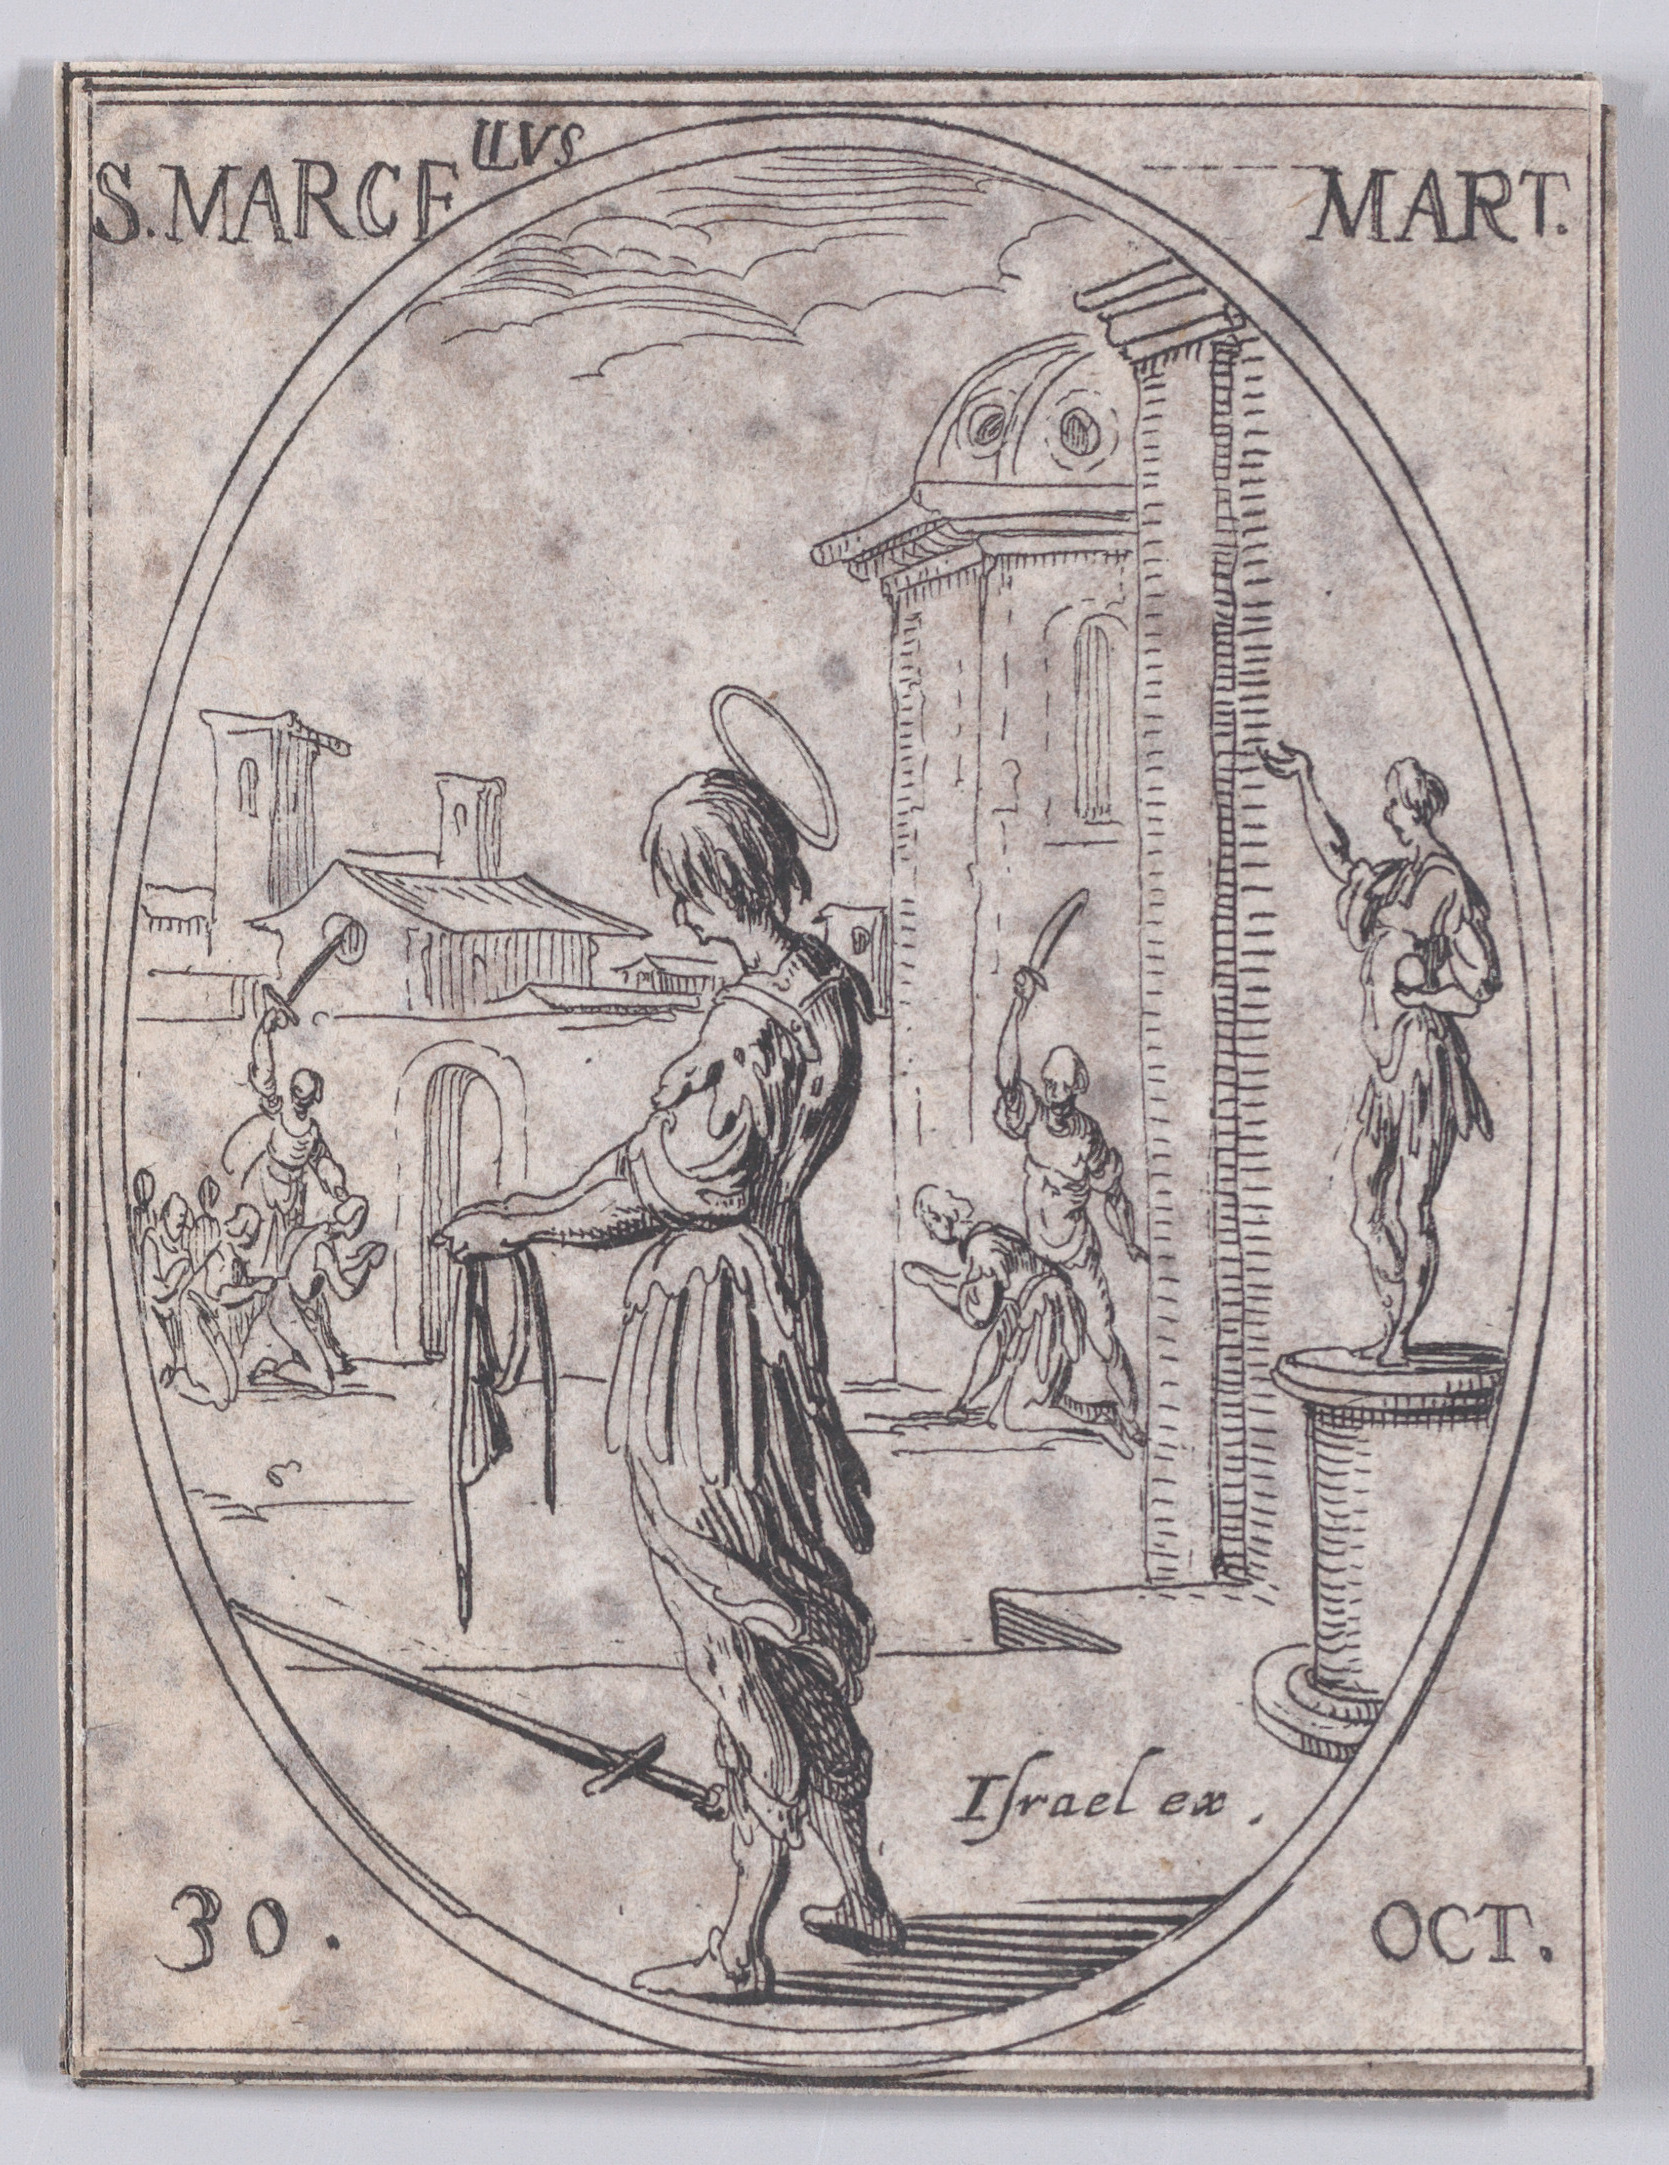 S. Marcel, martyr (St. Marcellus, Martyr), October 30th, from Les Images De Tous Les Saincts et Saintes de L'Année (Images of All of the Saints and Religious Events of the Year), Jacques Callot (French, Nancy 1592–1635 Nancy), Etching; second state of two (Lieure)